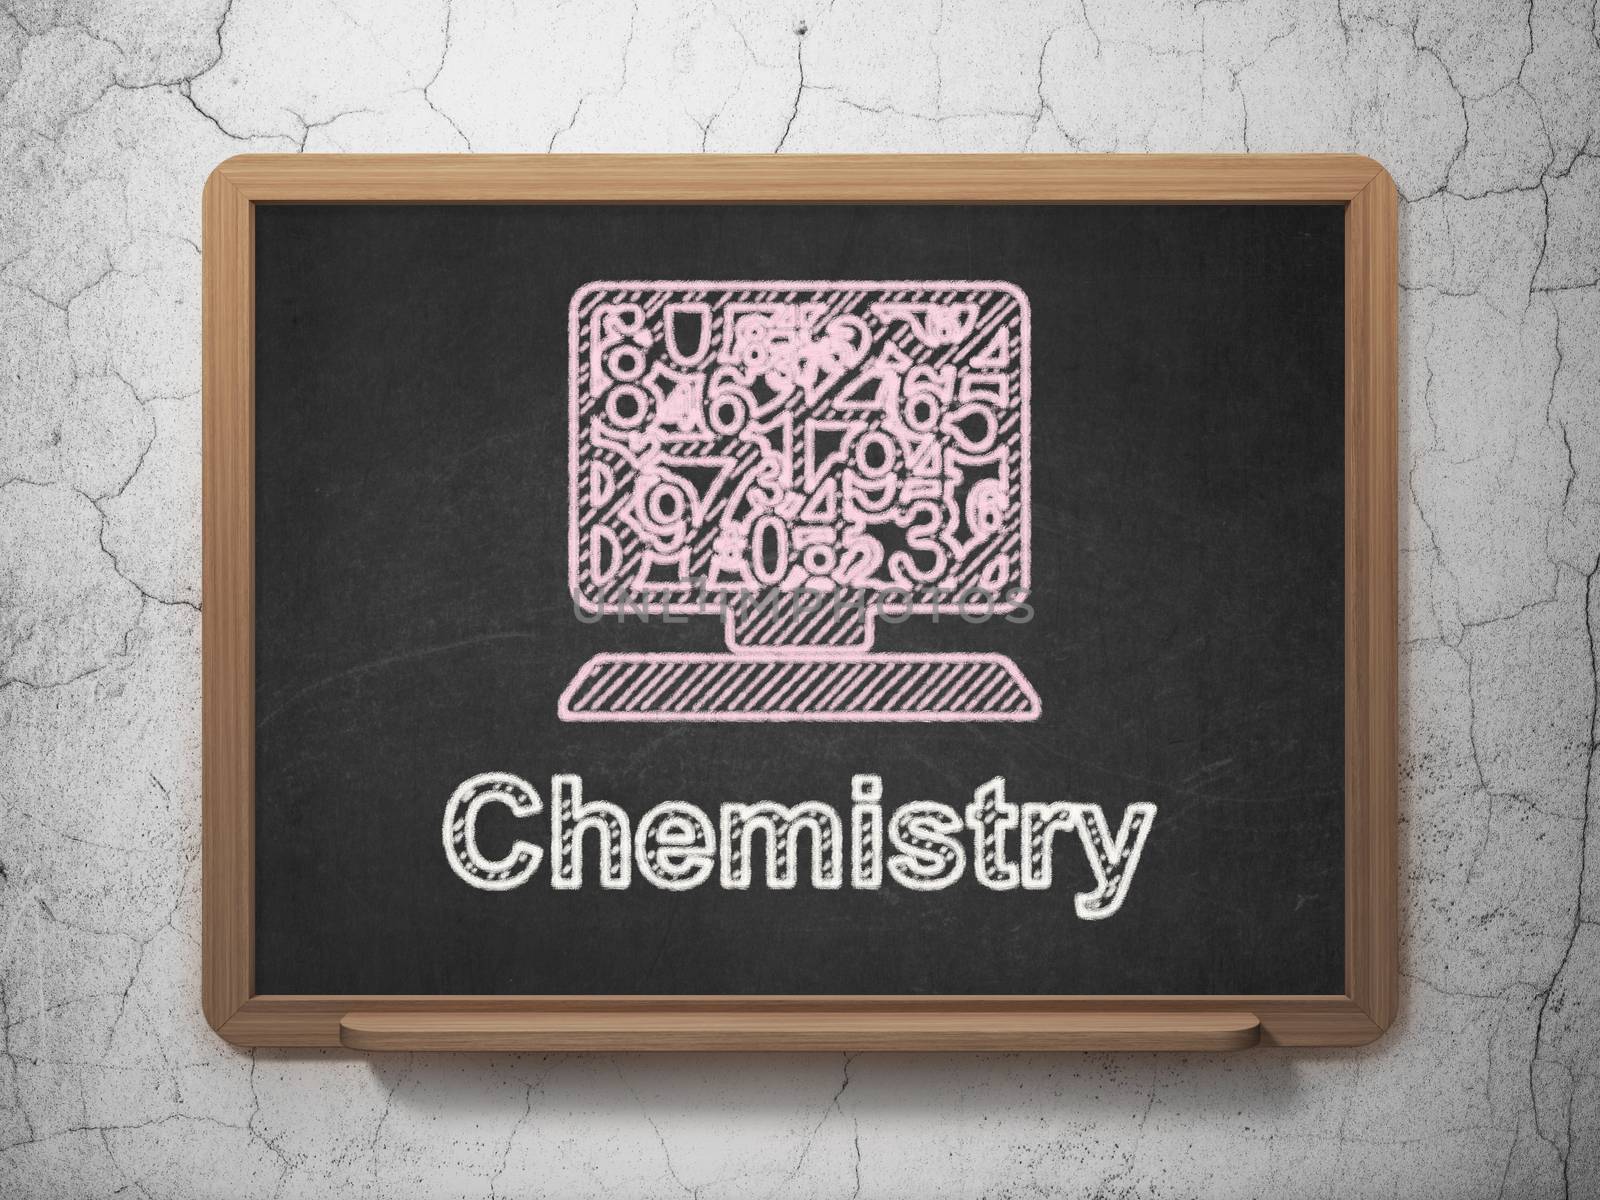 Education concept: Computer Pc icon and text Chemistry on Black chalkboard on grunge wall background, 3d render